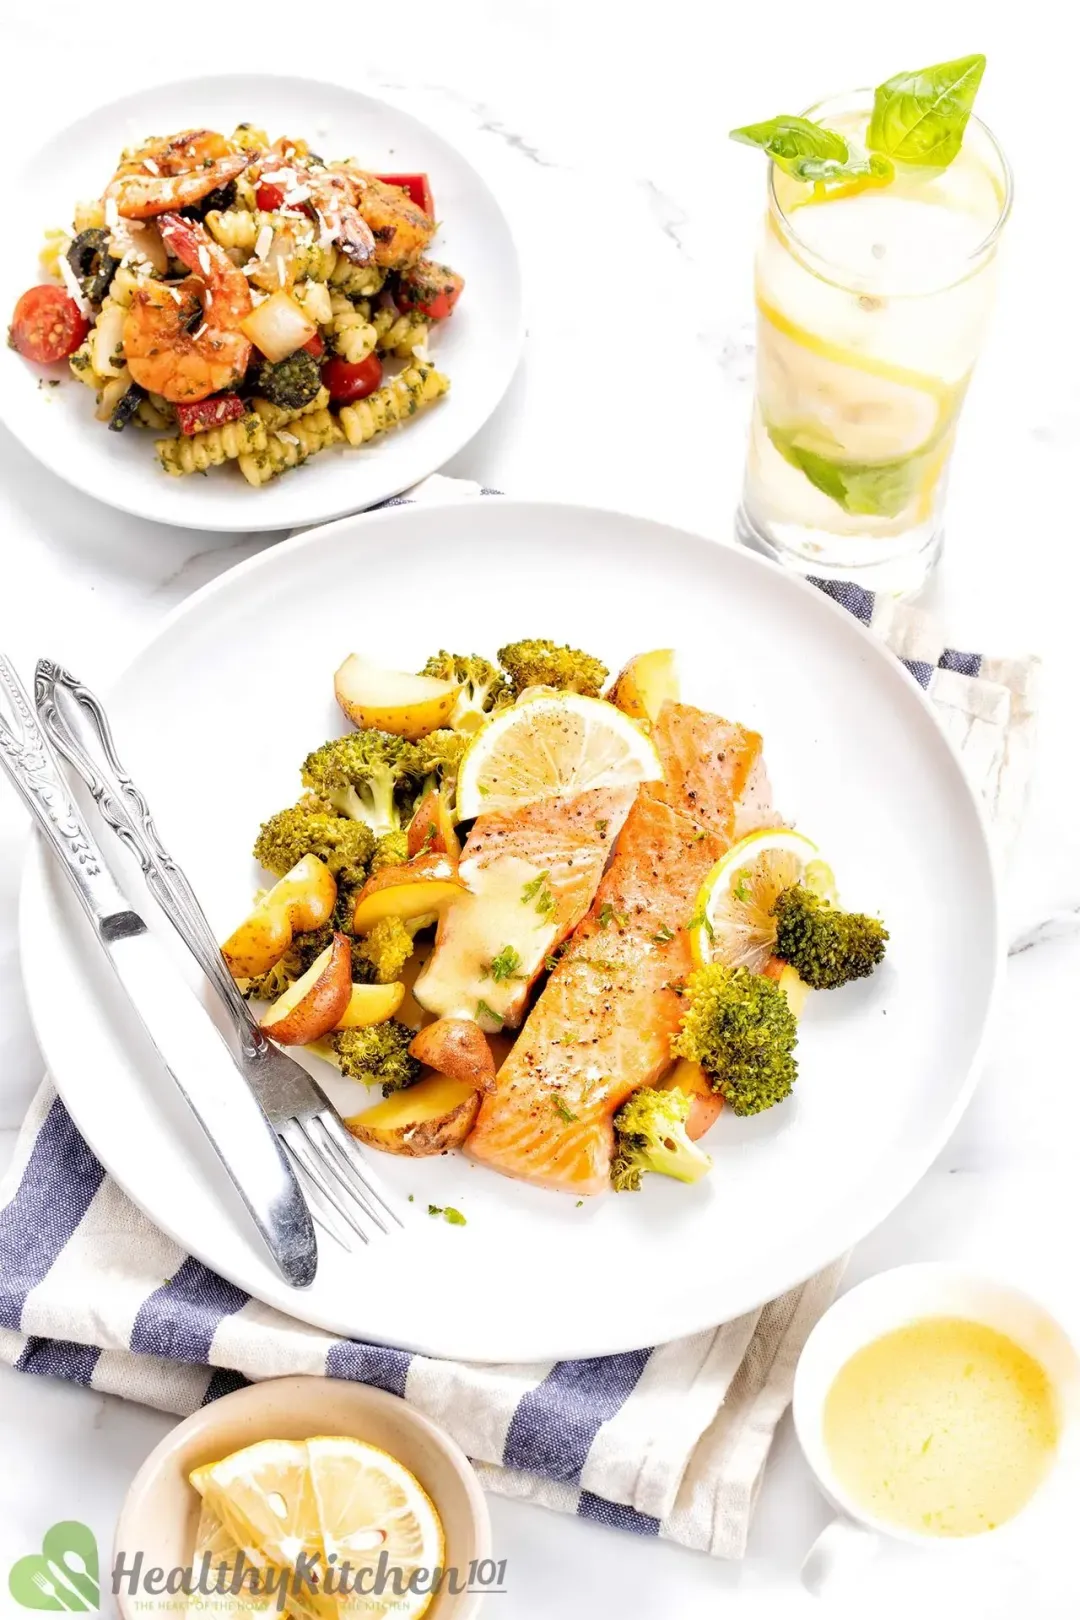 A serving plate of baked salmon, potato, and broccoli; on the side are a dish of pesto pasta salad, a tall glass of lemon water, a small bowl of buttery sauce, and lemon slices.